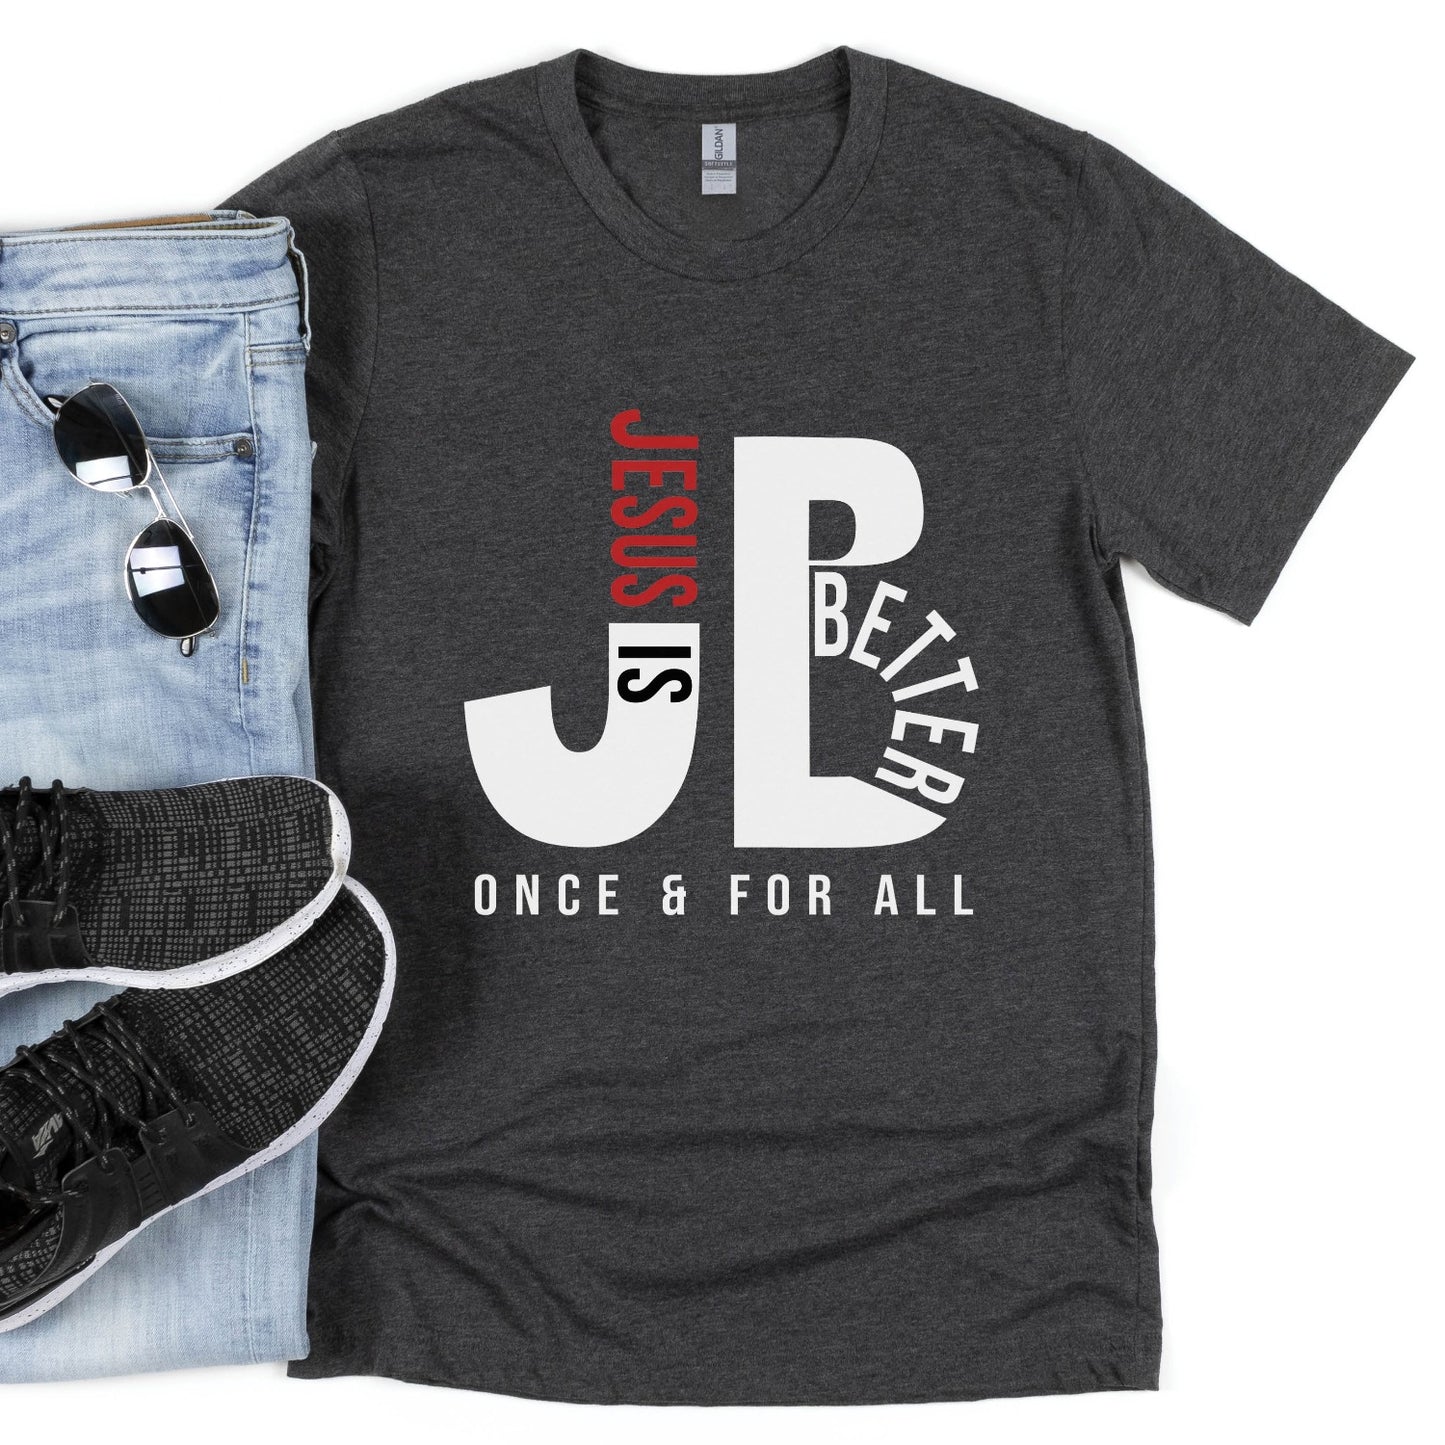 Men's "JB" typography "Jesus is Better Once and For All" design in white and red letters, based on the Christian bible book of Hebrews, printed on a heather dark gray color Unisex t-shirt, created for faith-based men and women, great father's day dad gift for him